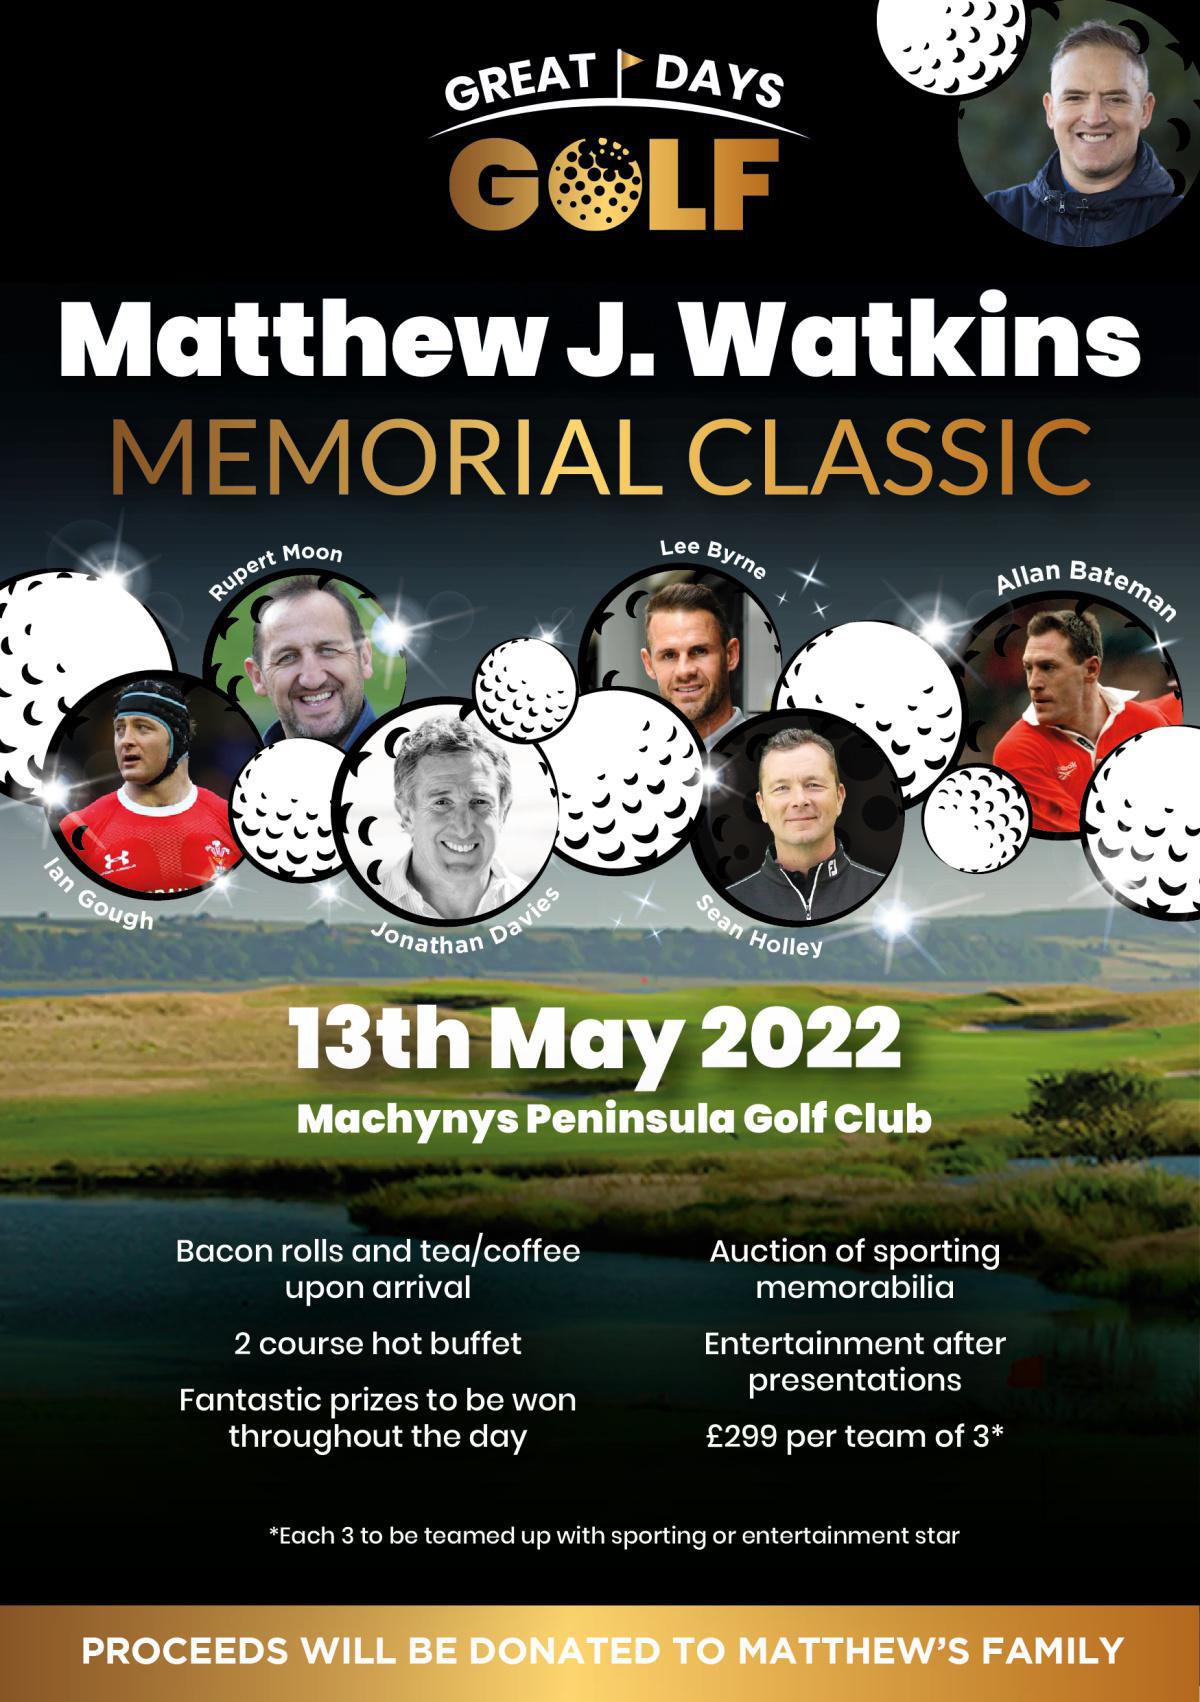 2nd Annual MJW Memorial Classic Held at Machynys